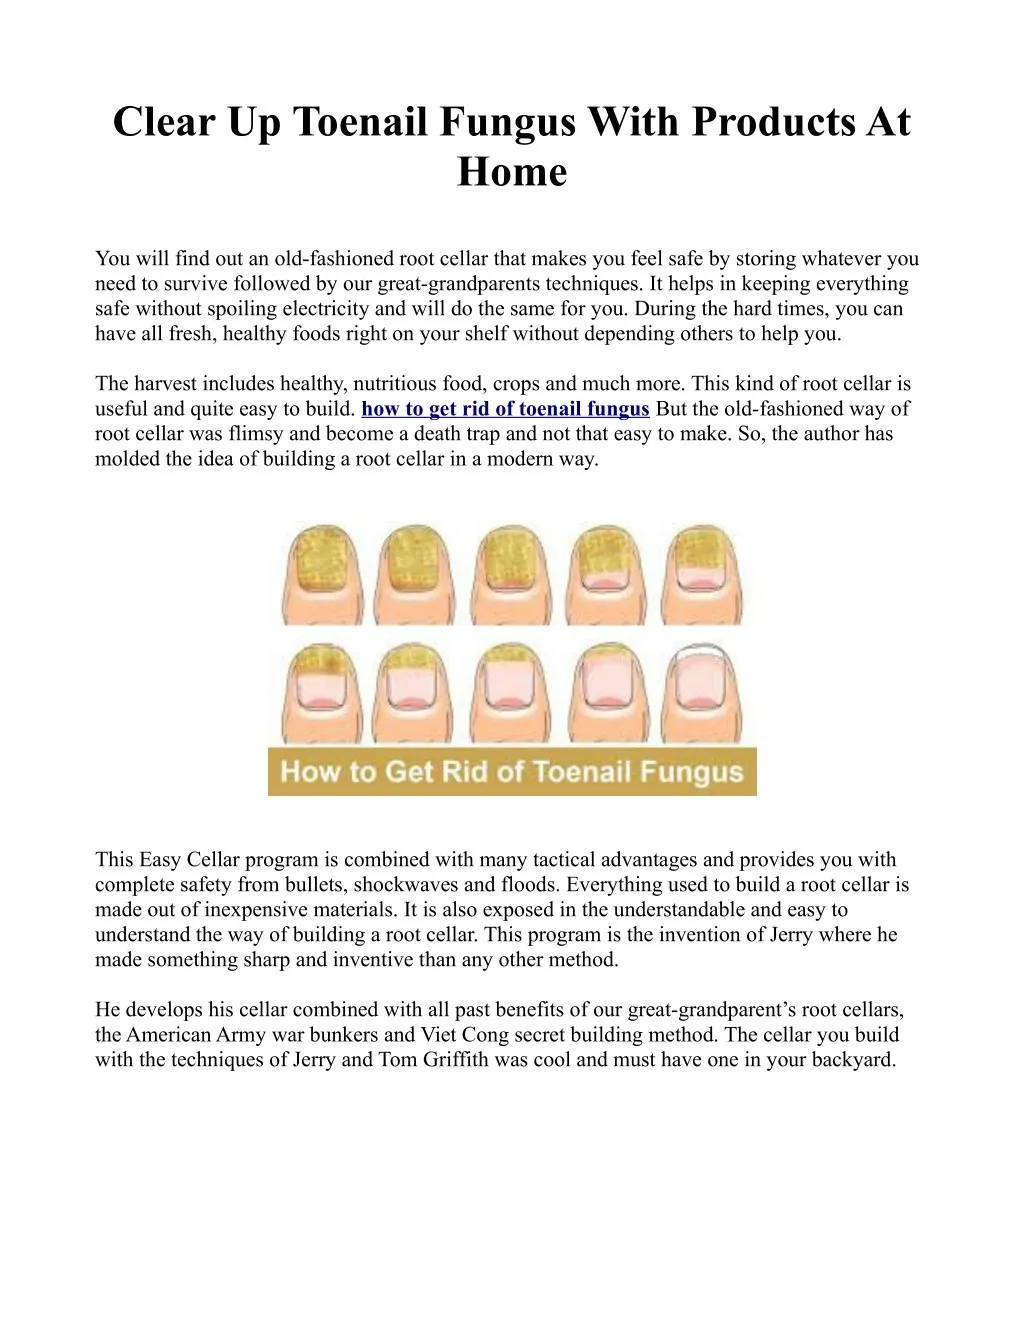 clear up toenail fungus with products at home